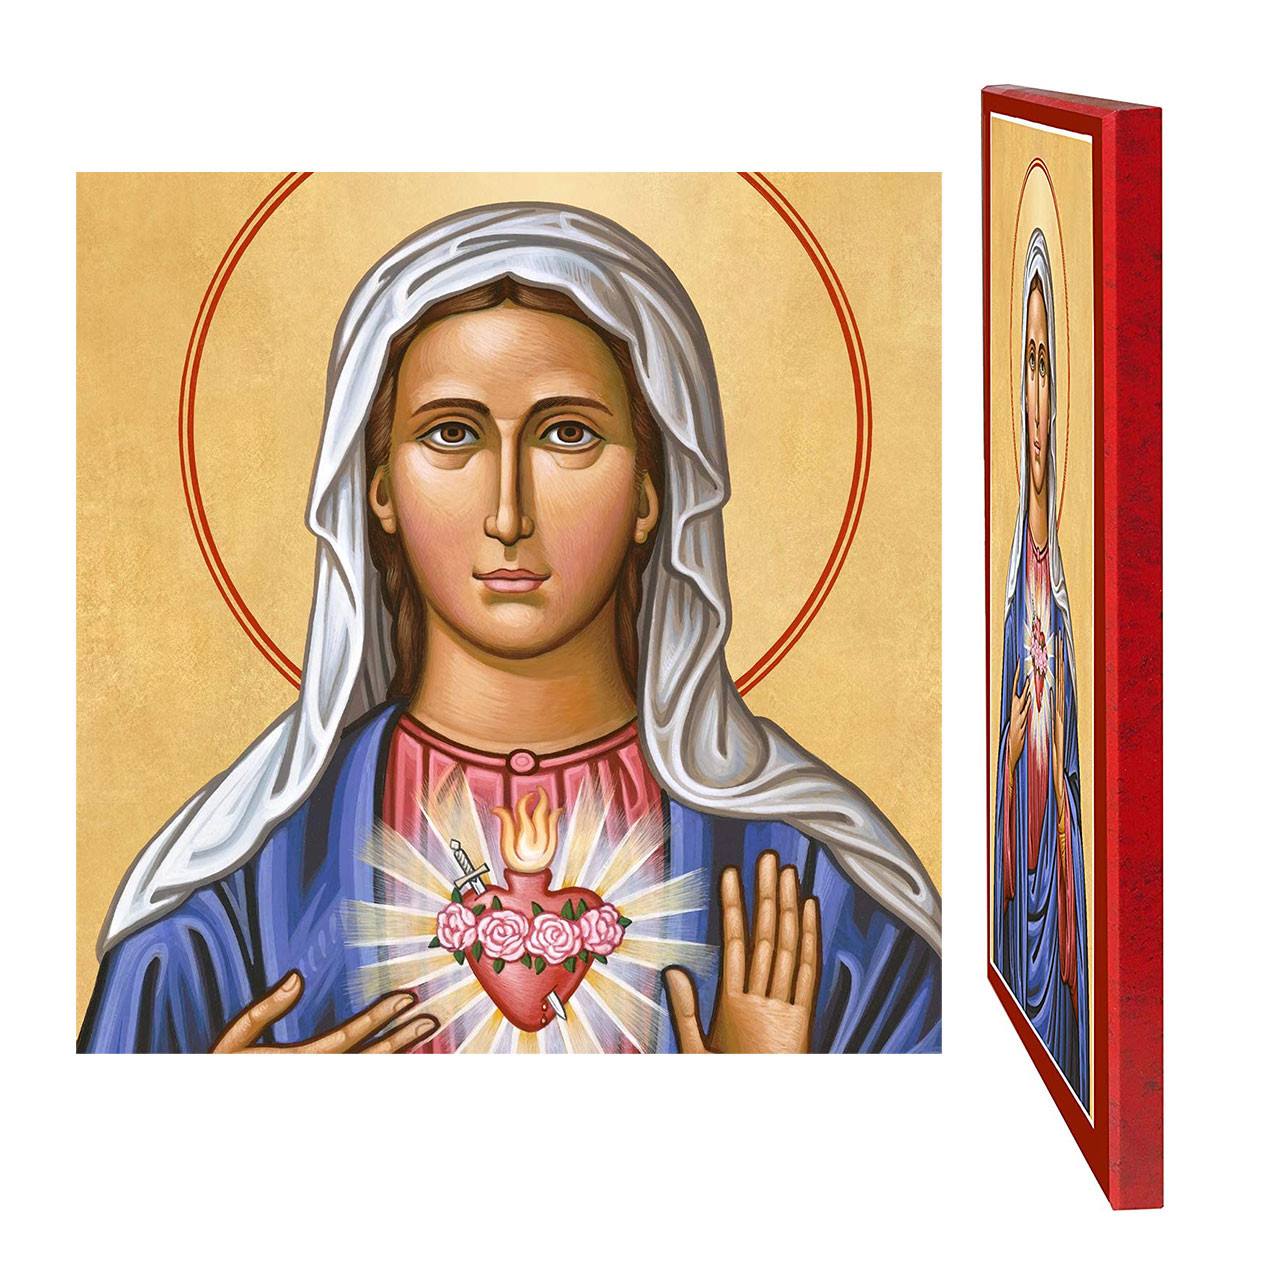 Detail and Side views of the 3x4 Immaculate Heart Icon